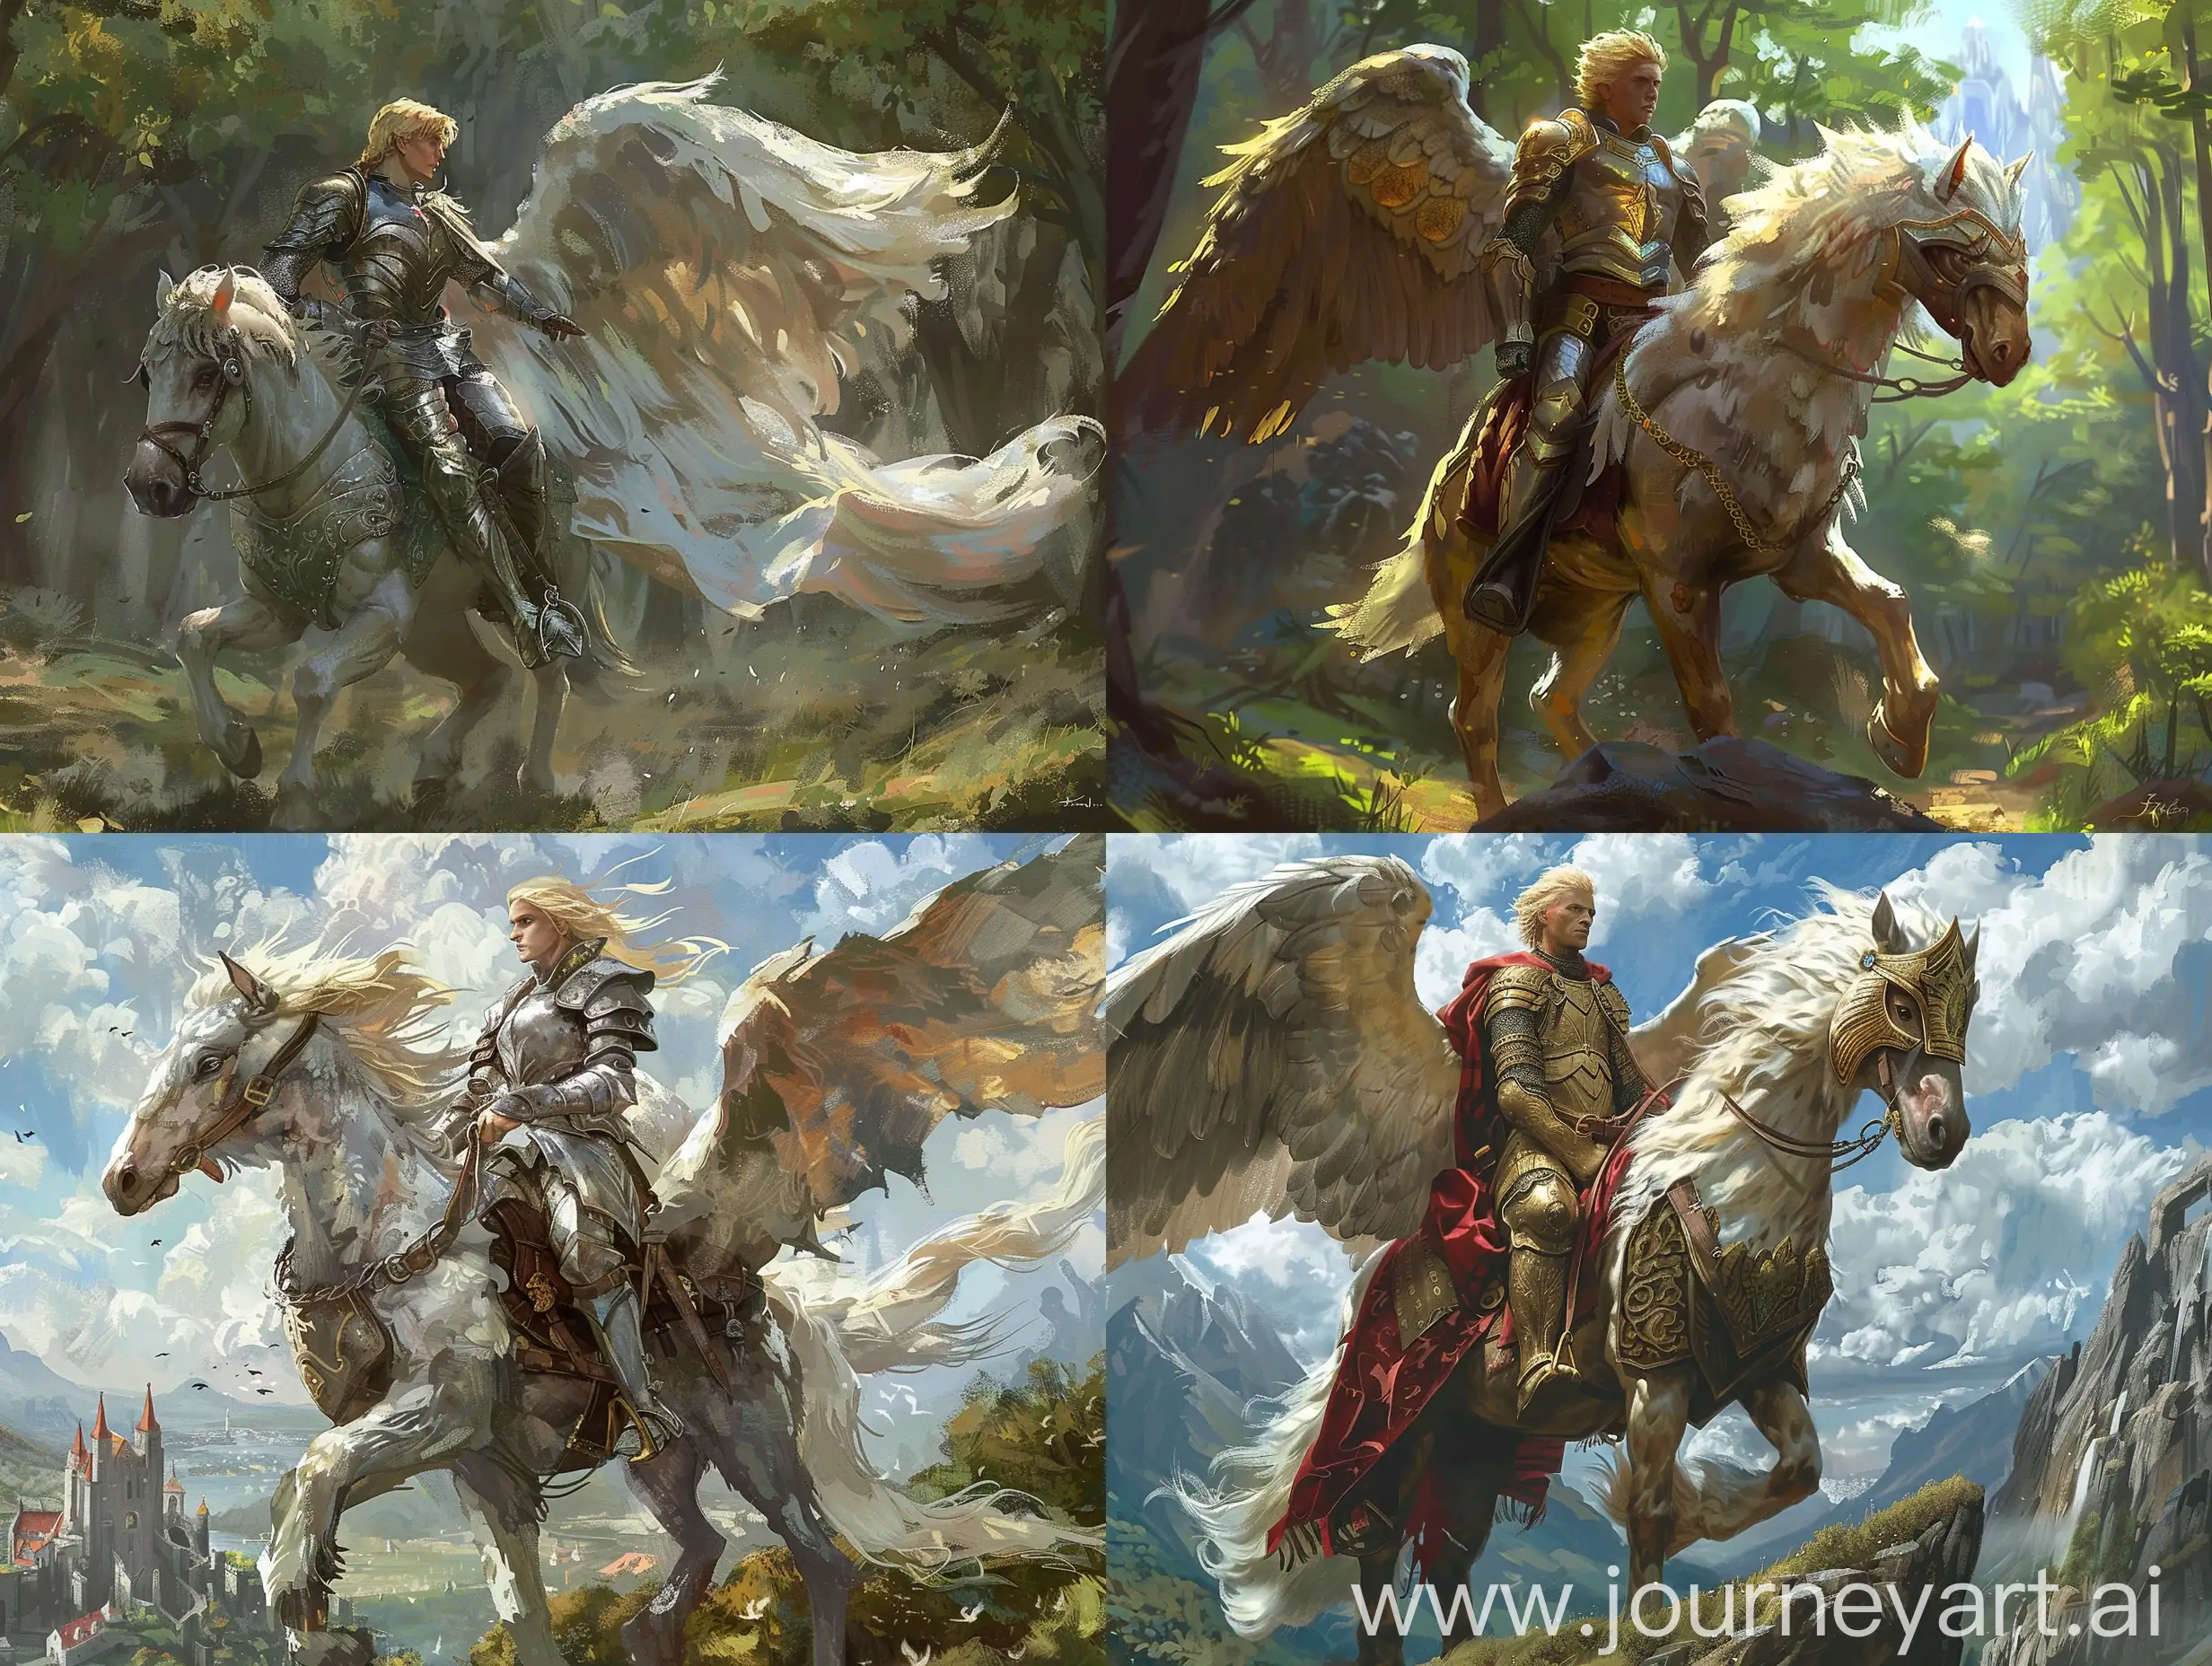 A blond knight riding a hippogriff turns around and sighs